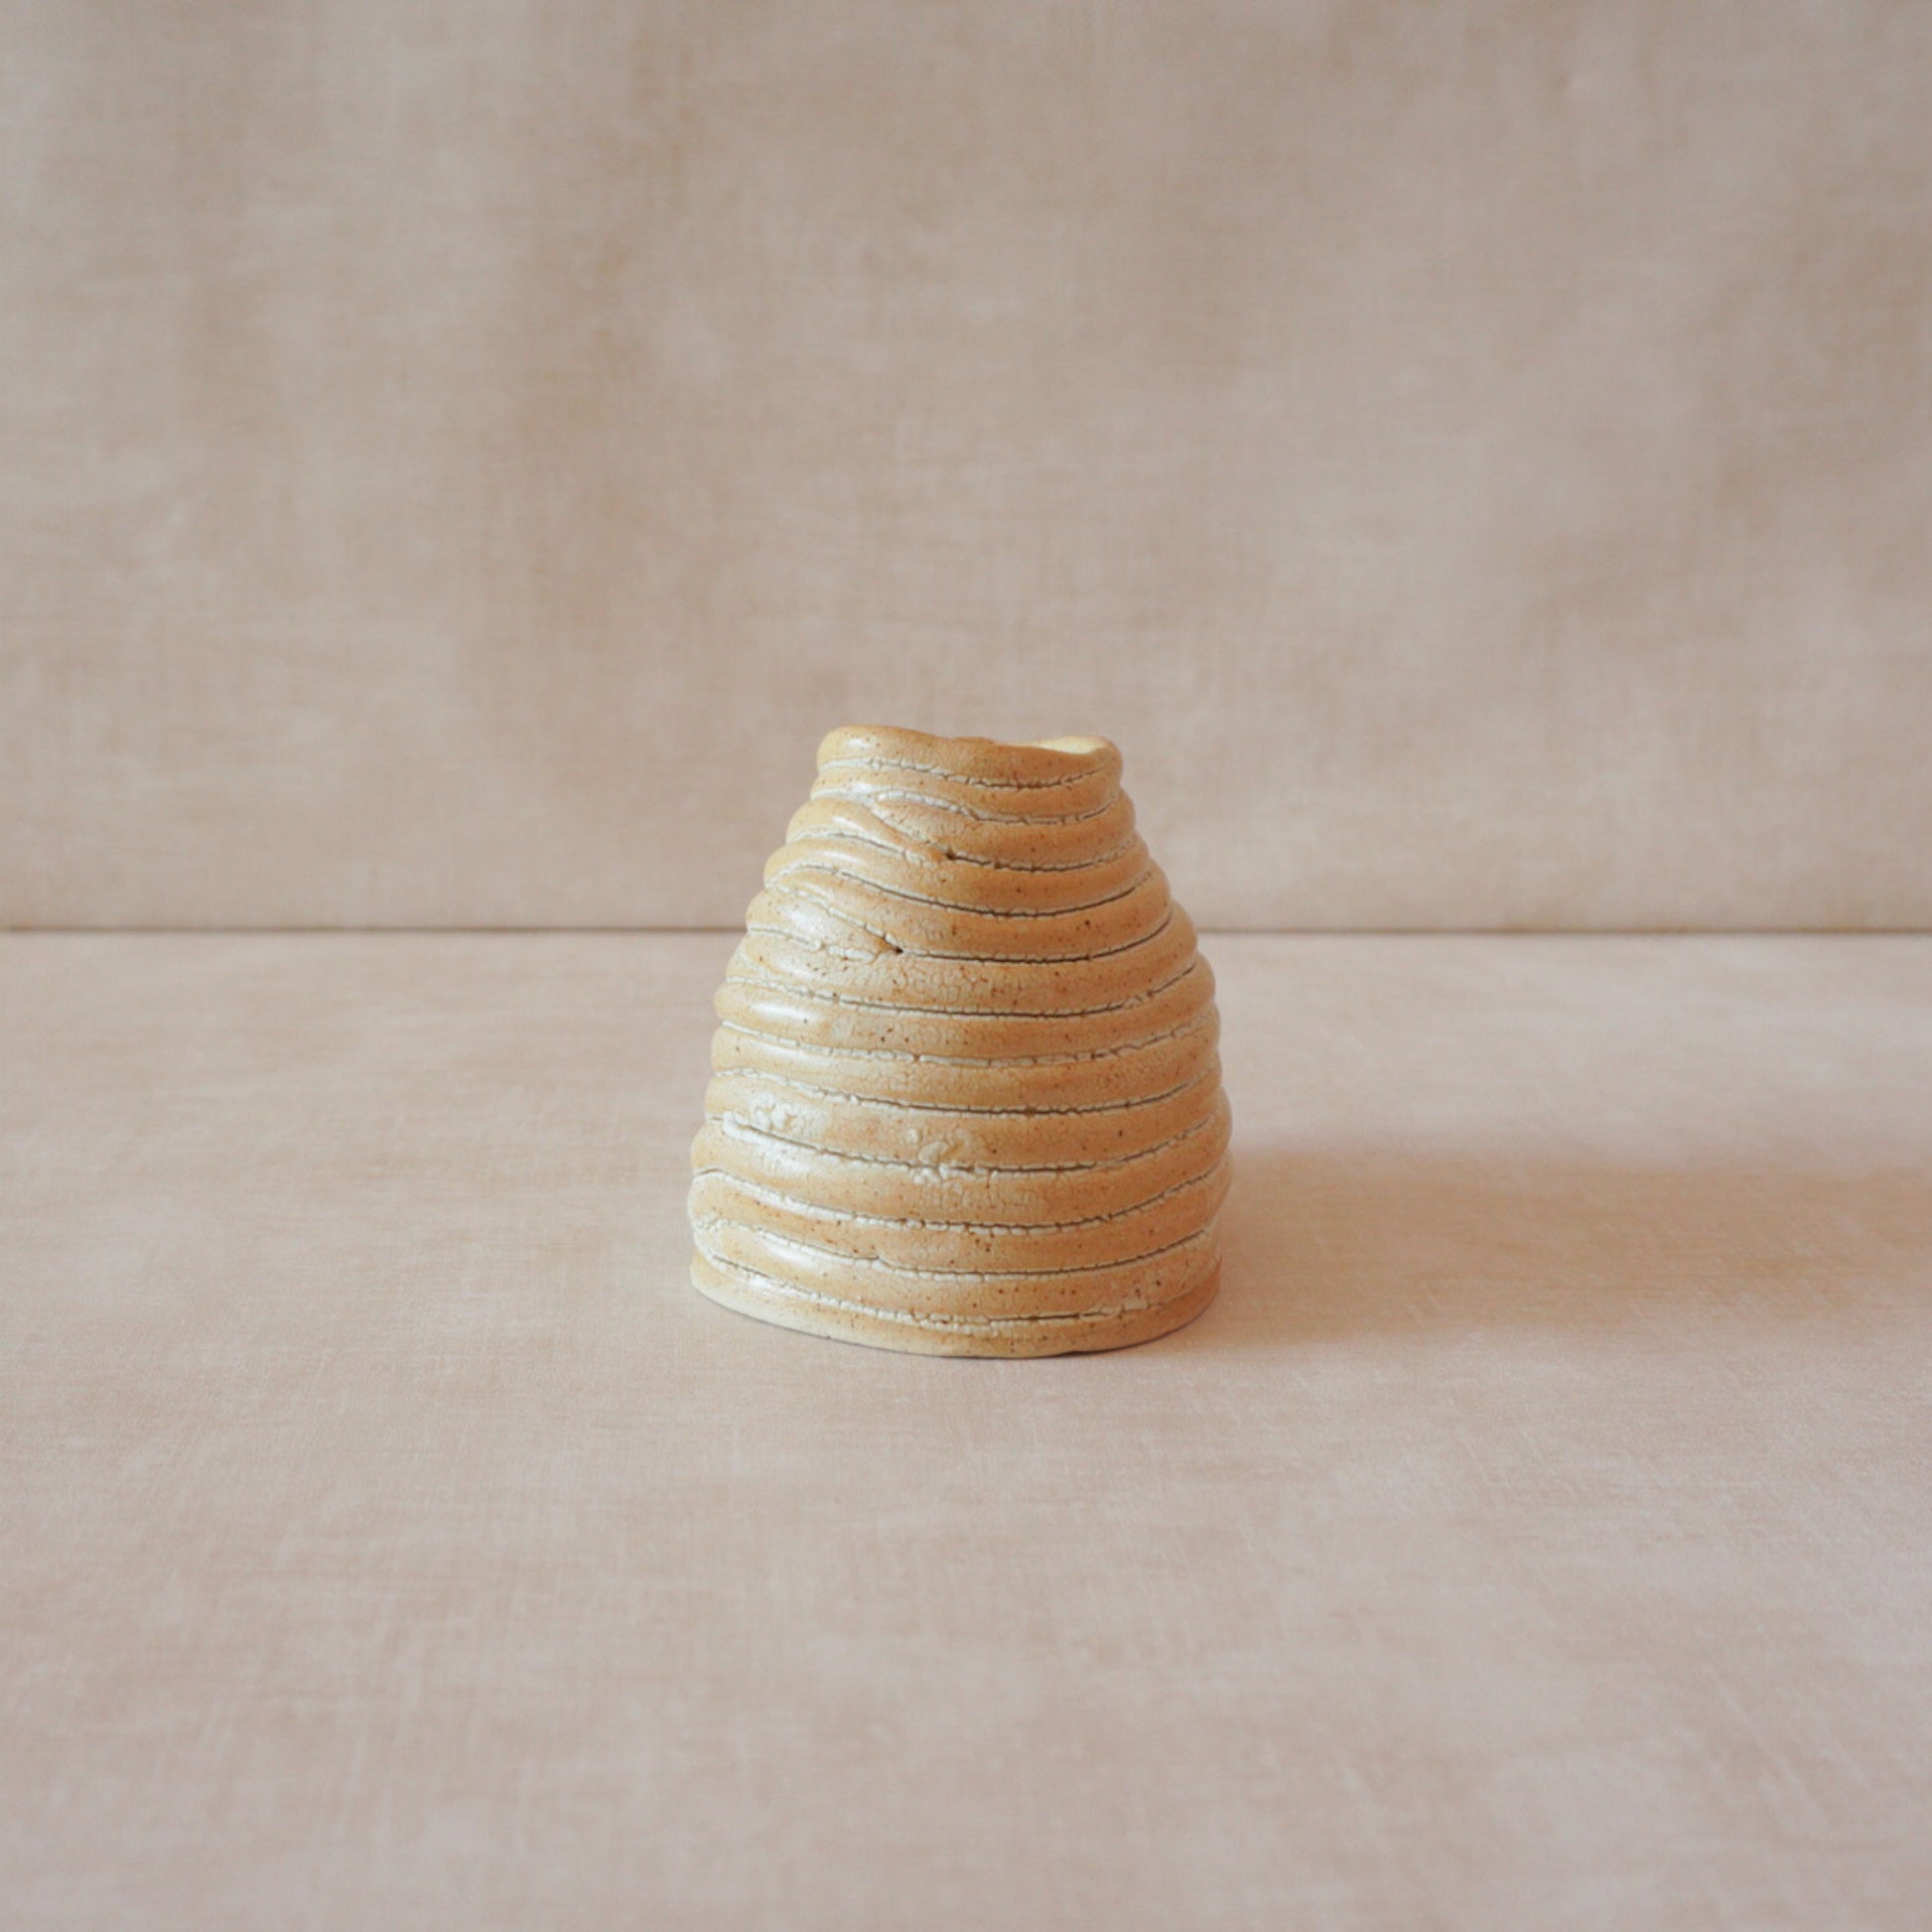 Handcrafted ceramic vase with organic form and natural texture